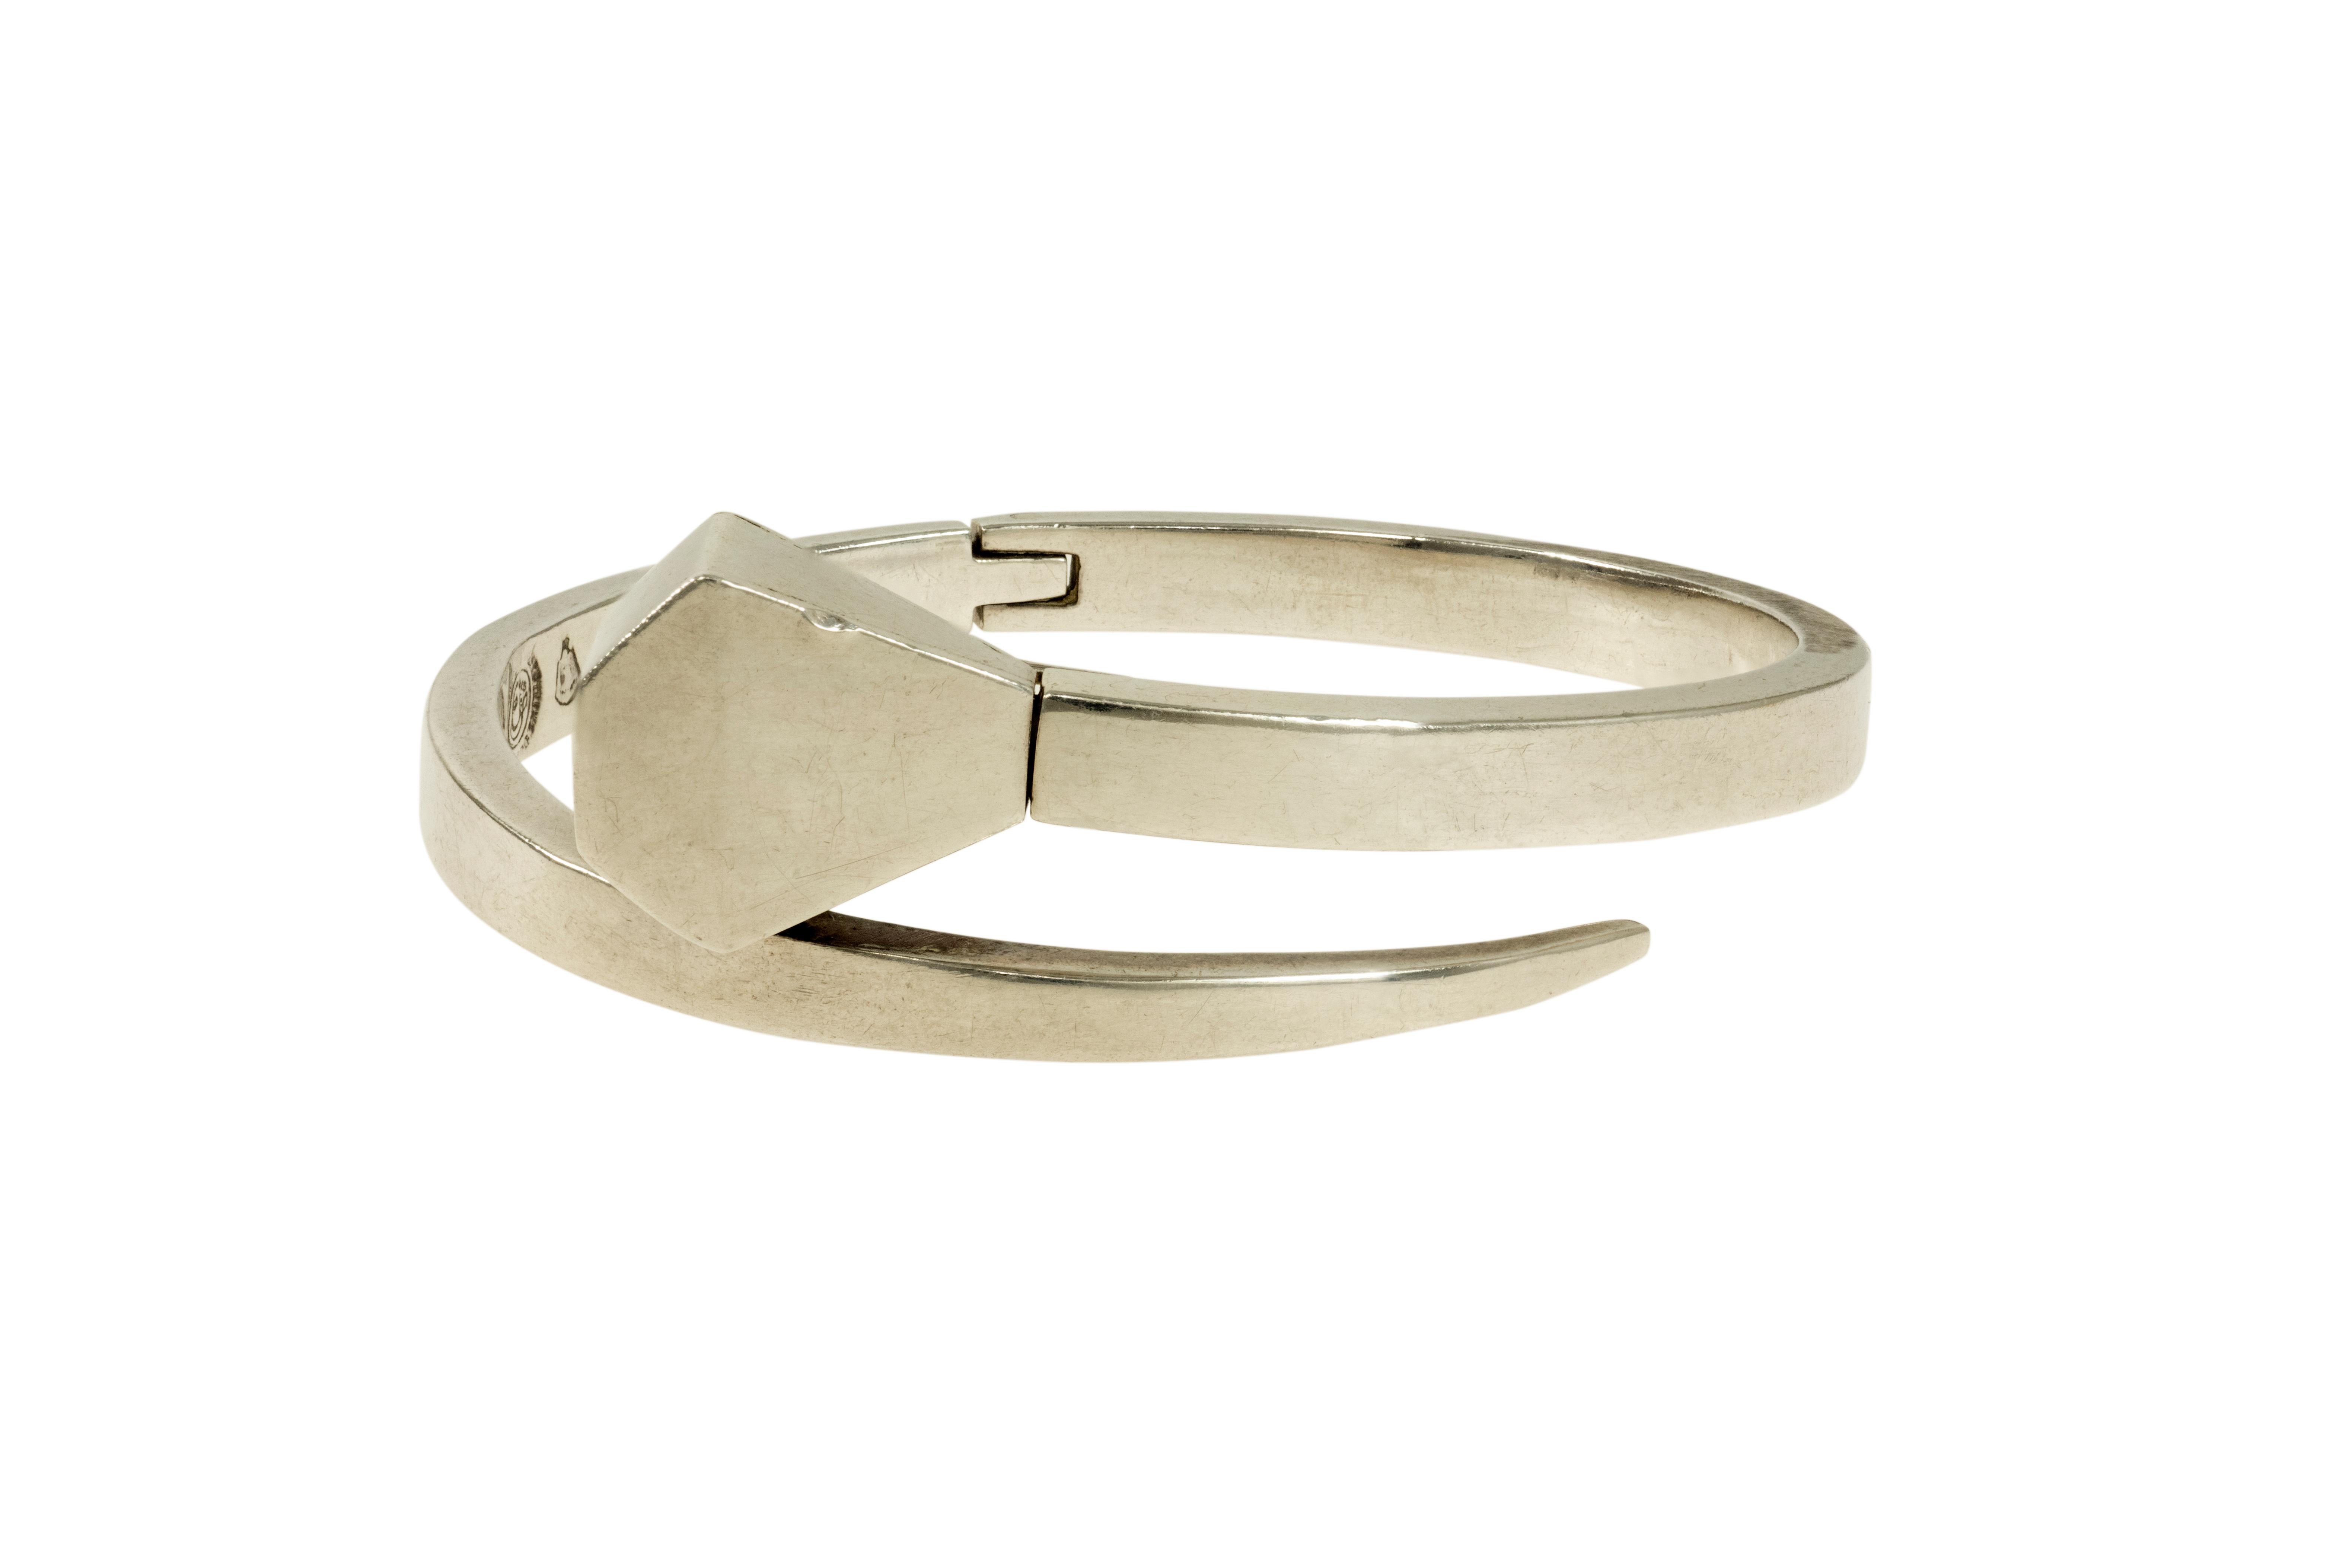 A sterling silver nail design collar and bracelet, by William Spratling, c. 1965.

The pieces are stamped for William Spratling; Eagle 30. 

The collar is 15